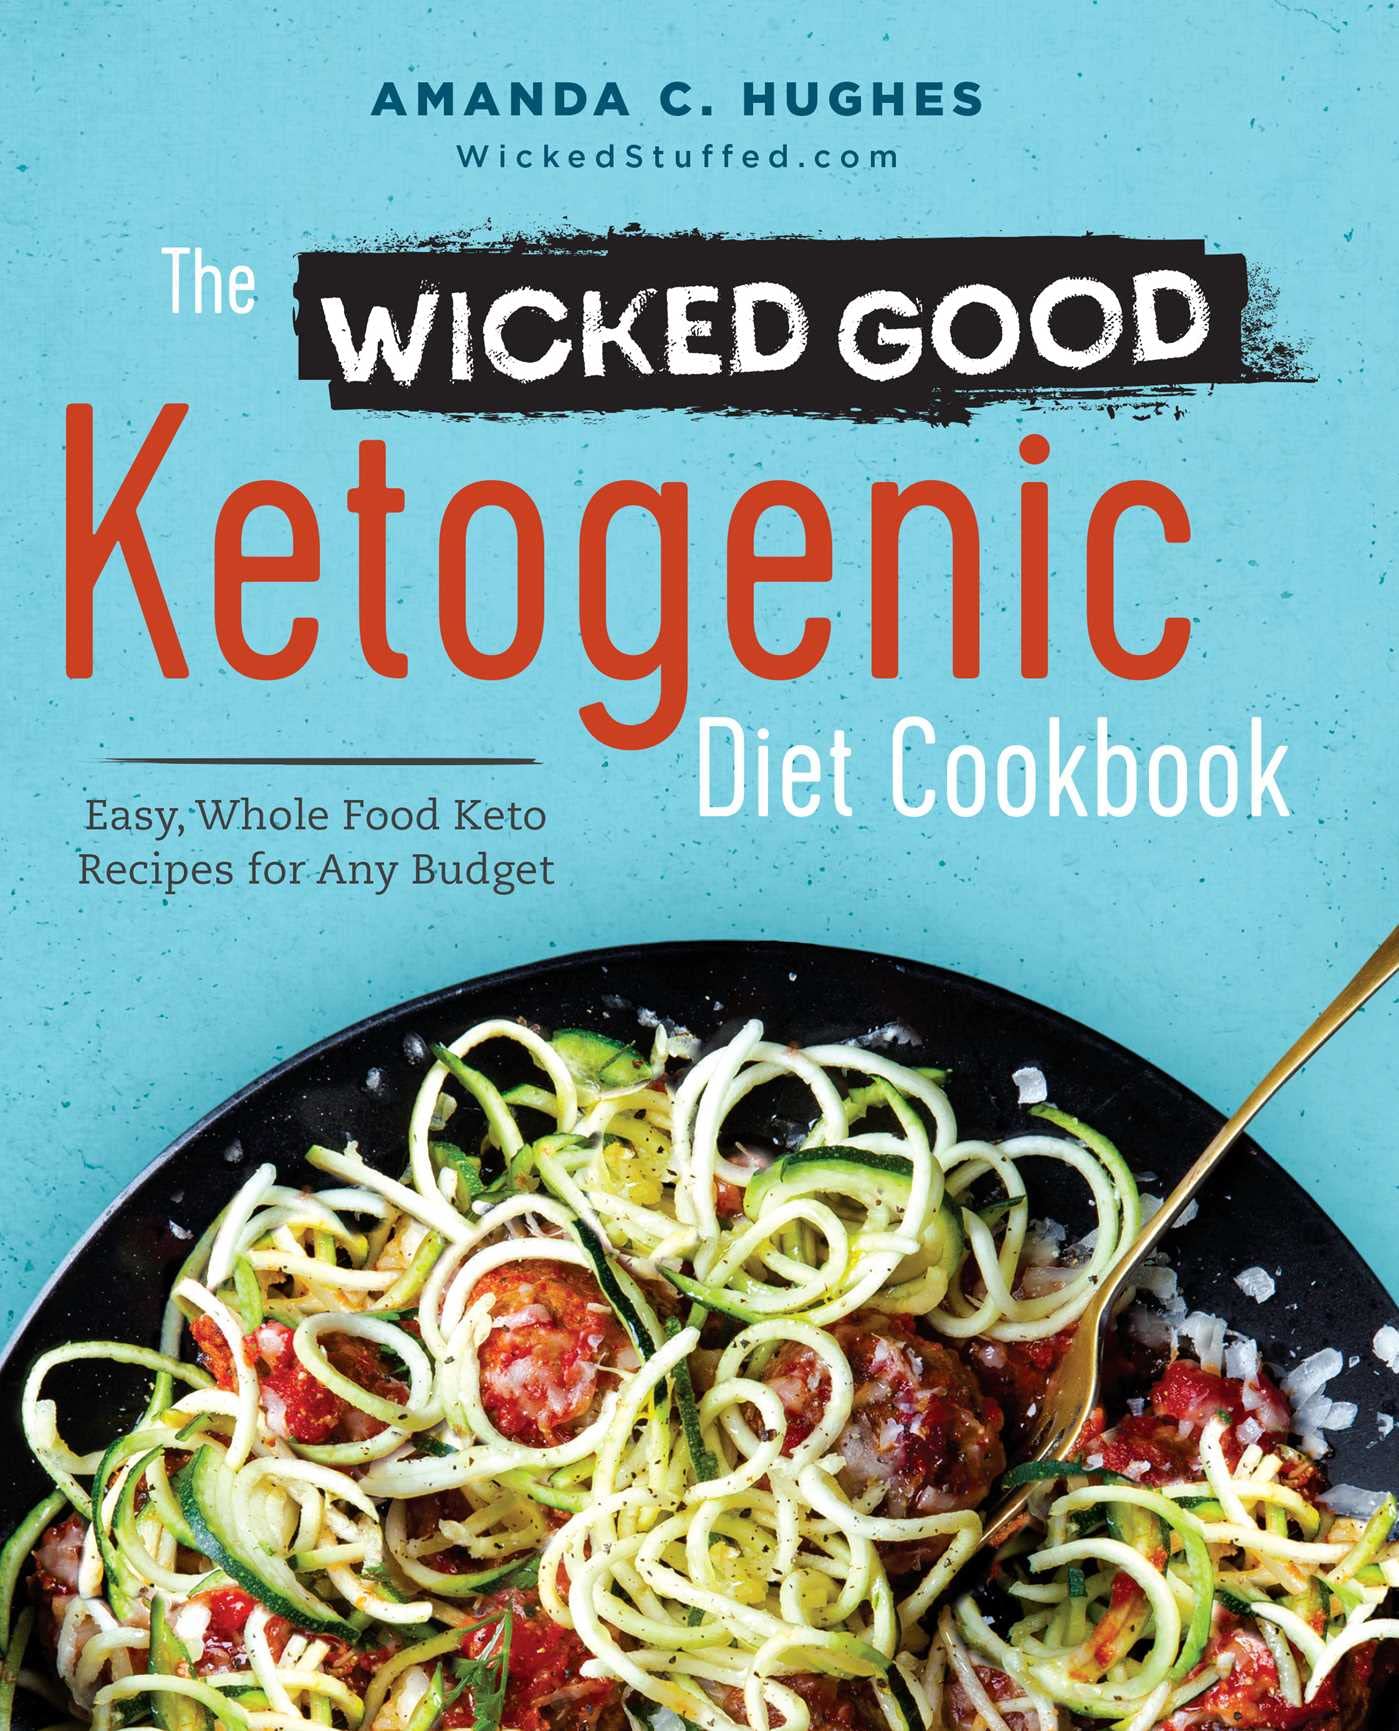 Wicked Good Ketogenic Diet Cookbook: Easy, Whole Food Keto Recipes for Any Budget